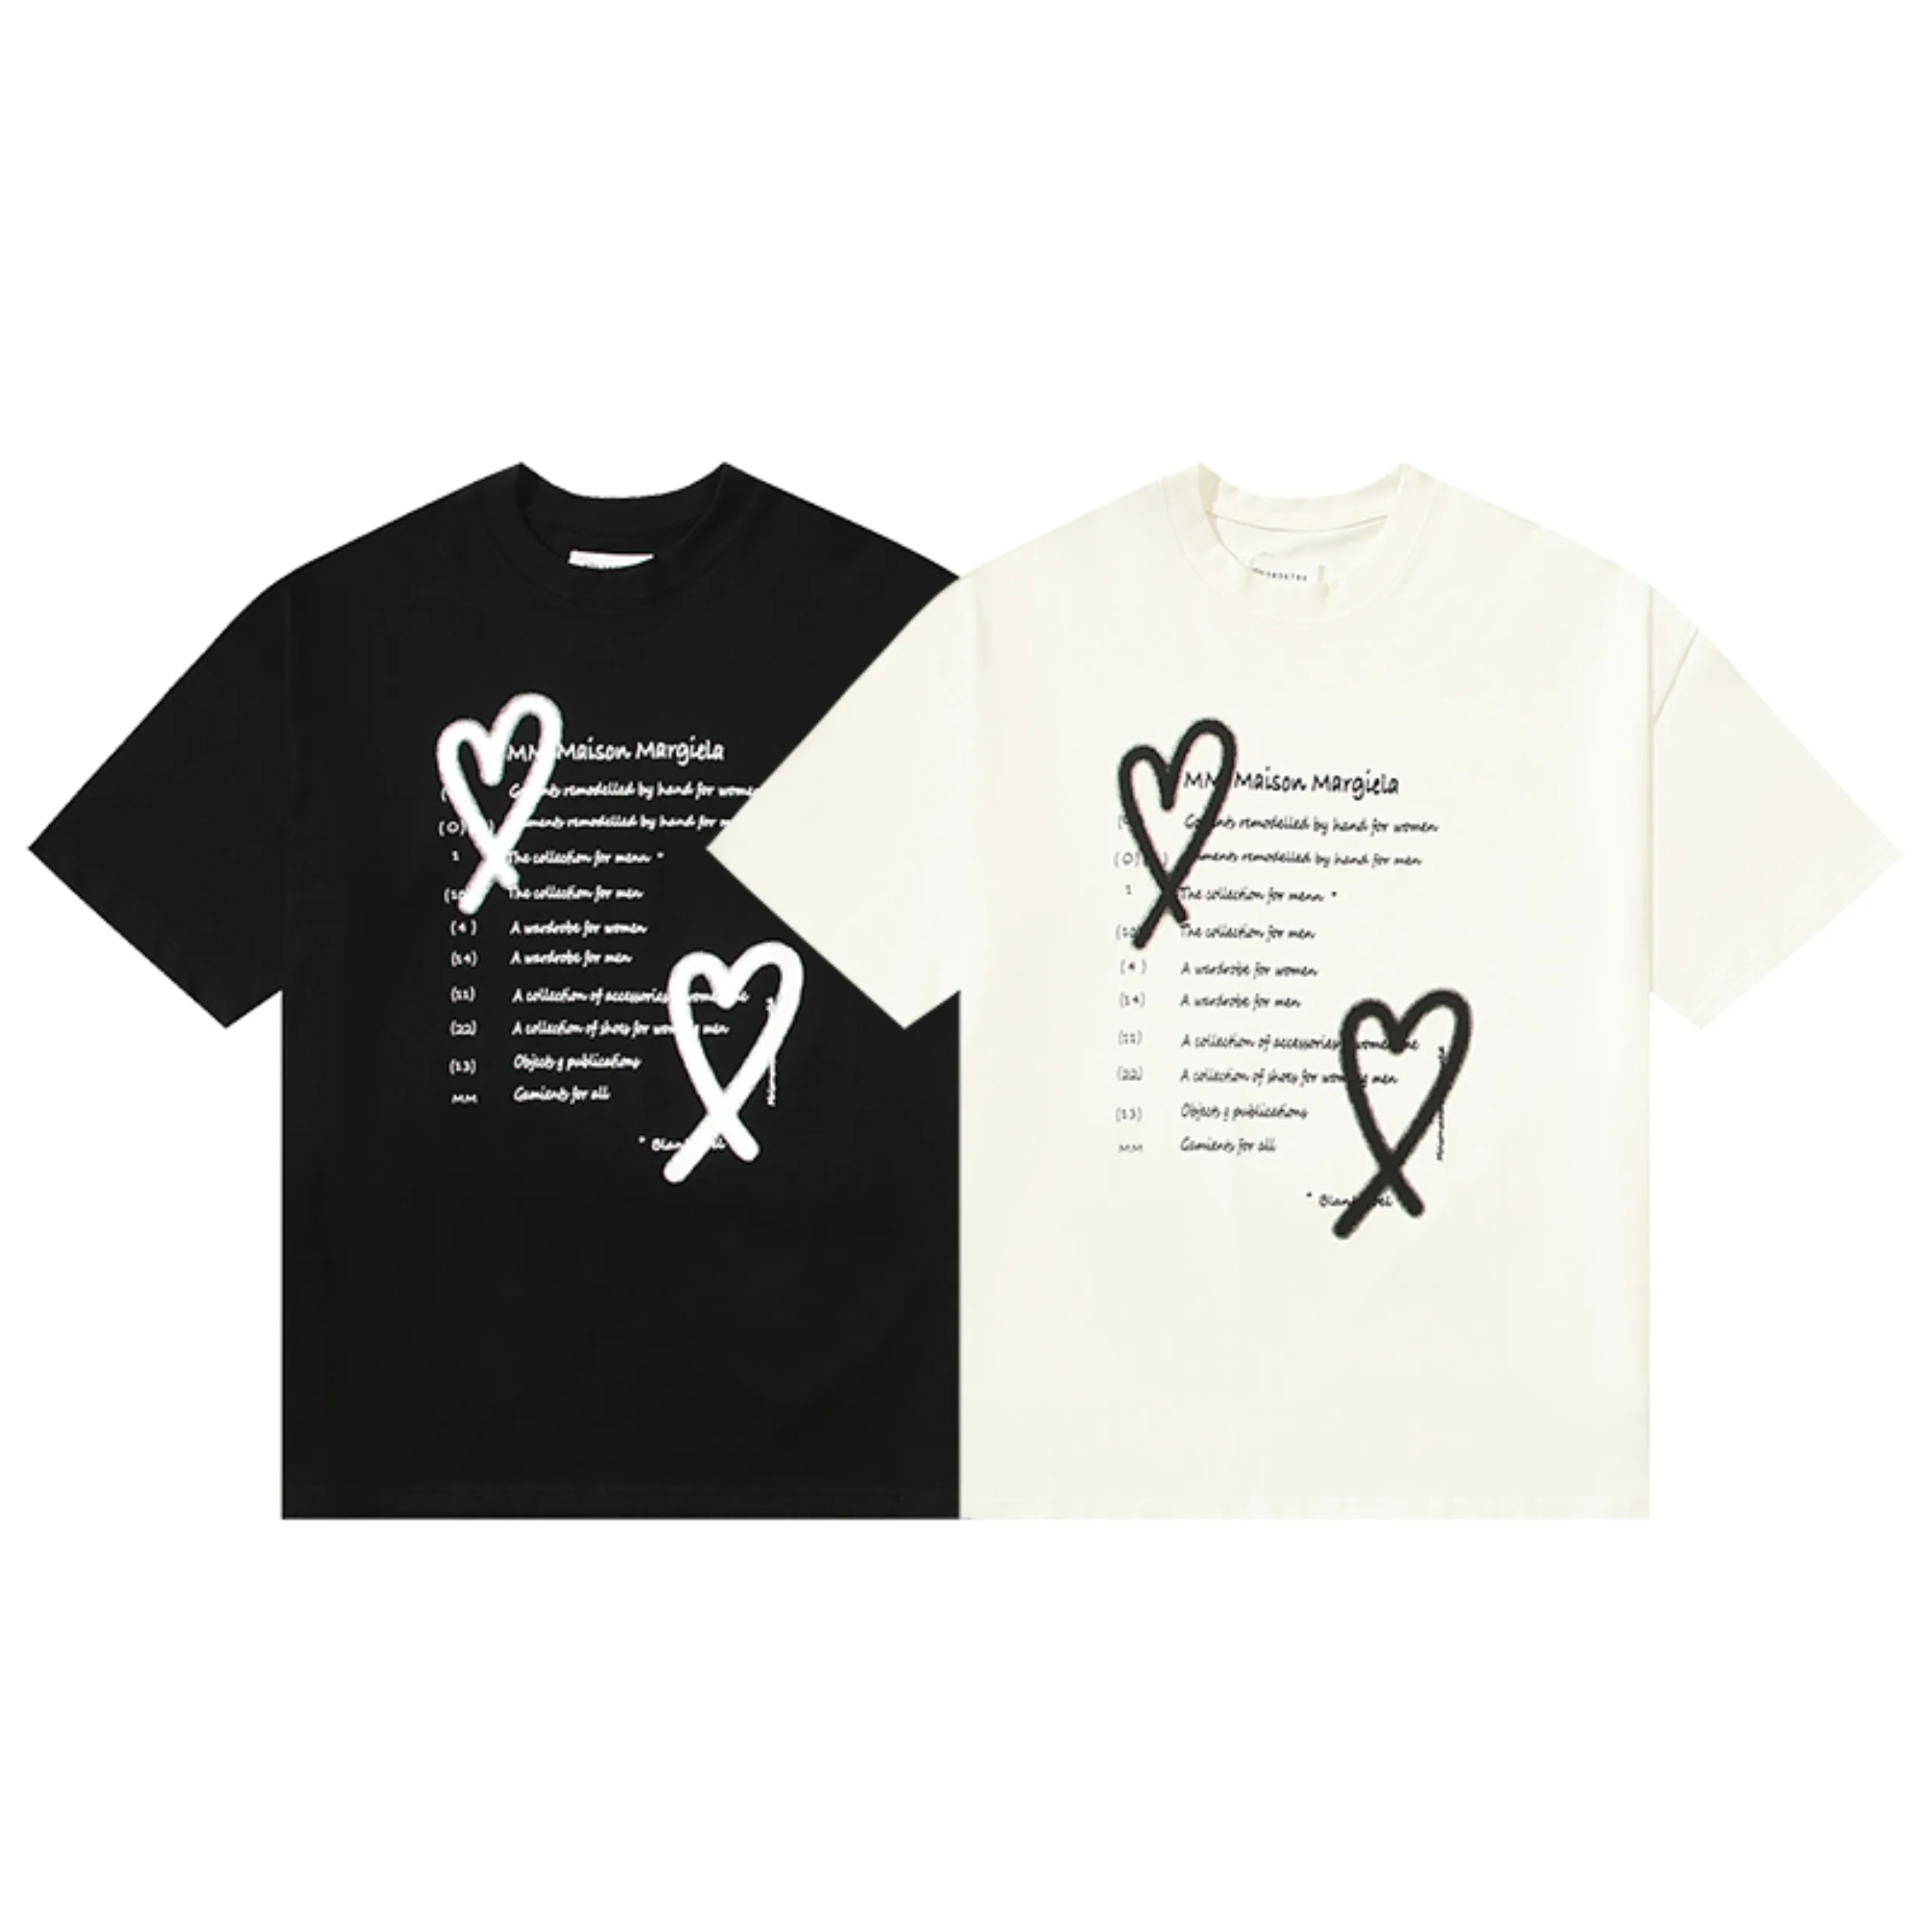 

Margiela unisex style T-shirt MM6 English love heart print loose casual short-sleeved t-shirt men and women couple models tops